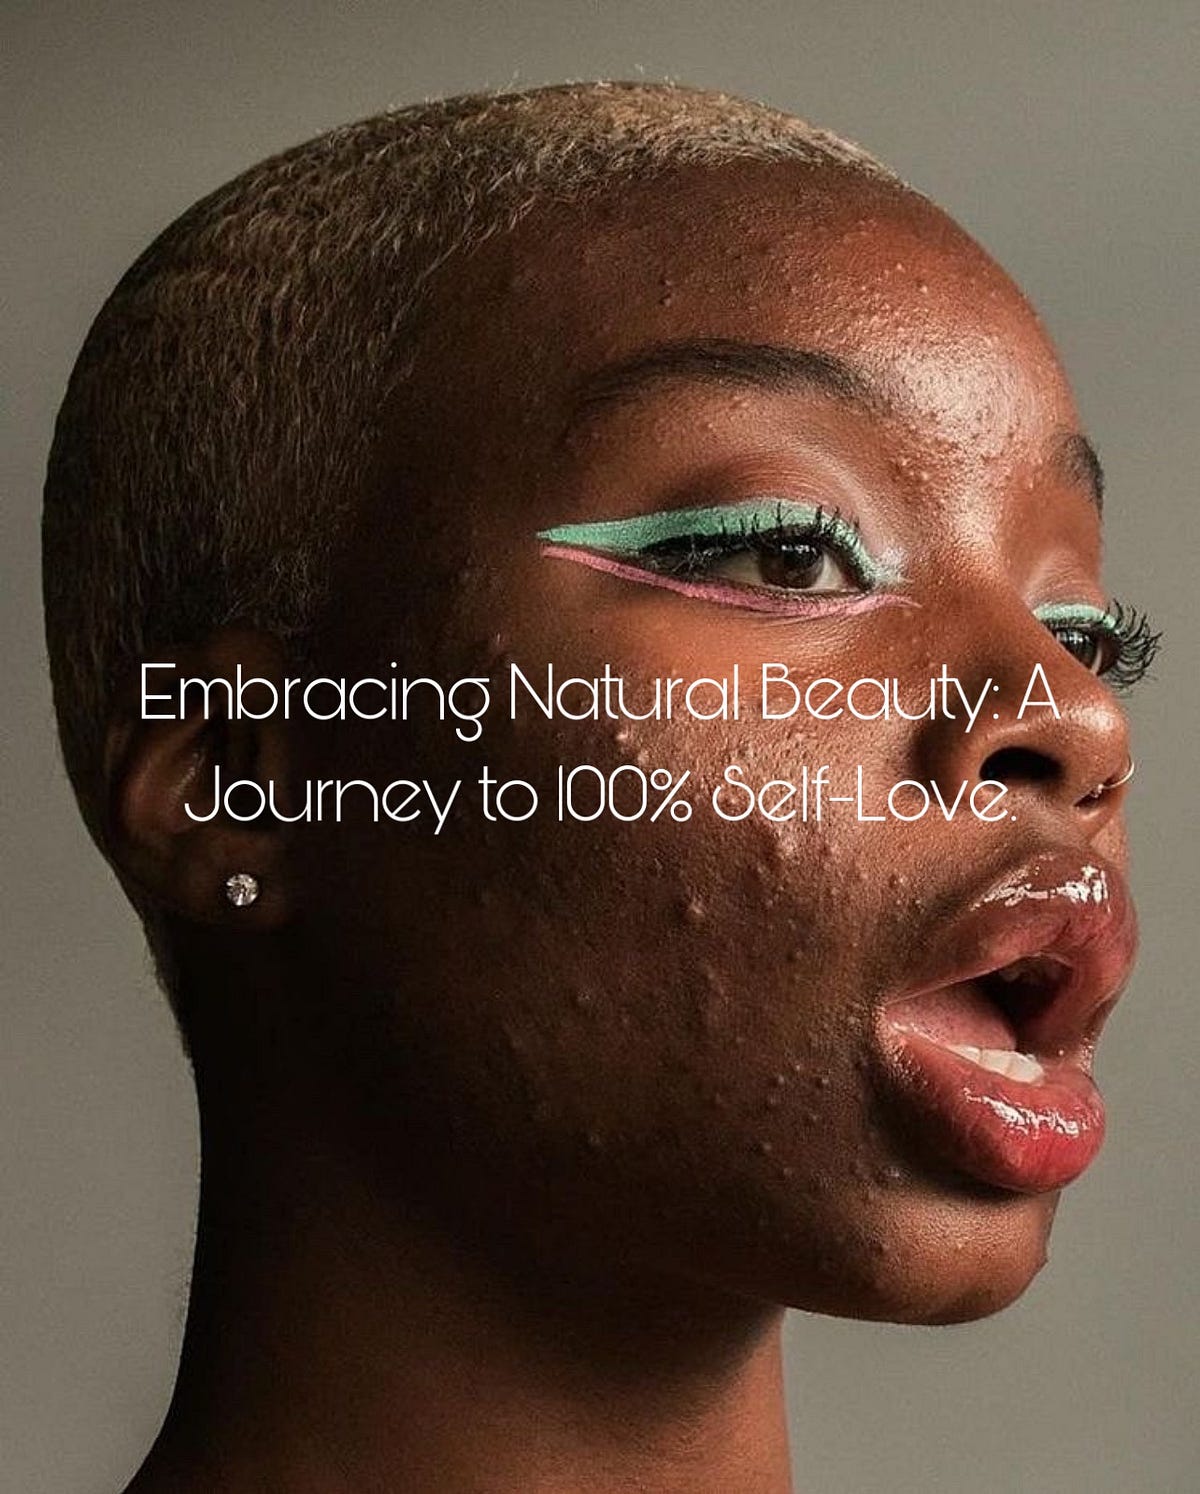 Embracing Natural Beauty: A Journey to 100% Self-Love., by Alisiia Kovtun